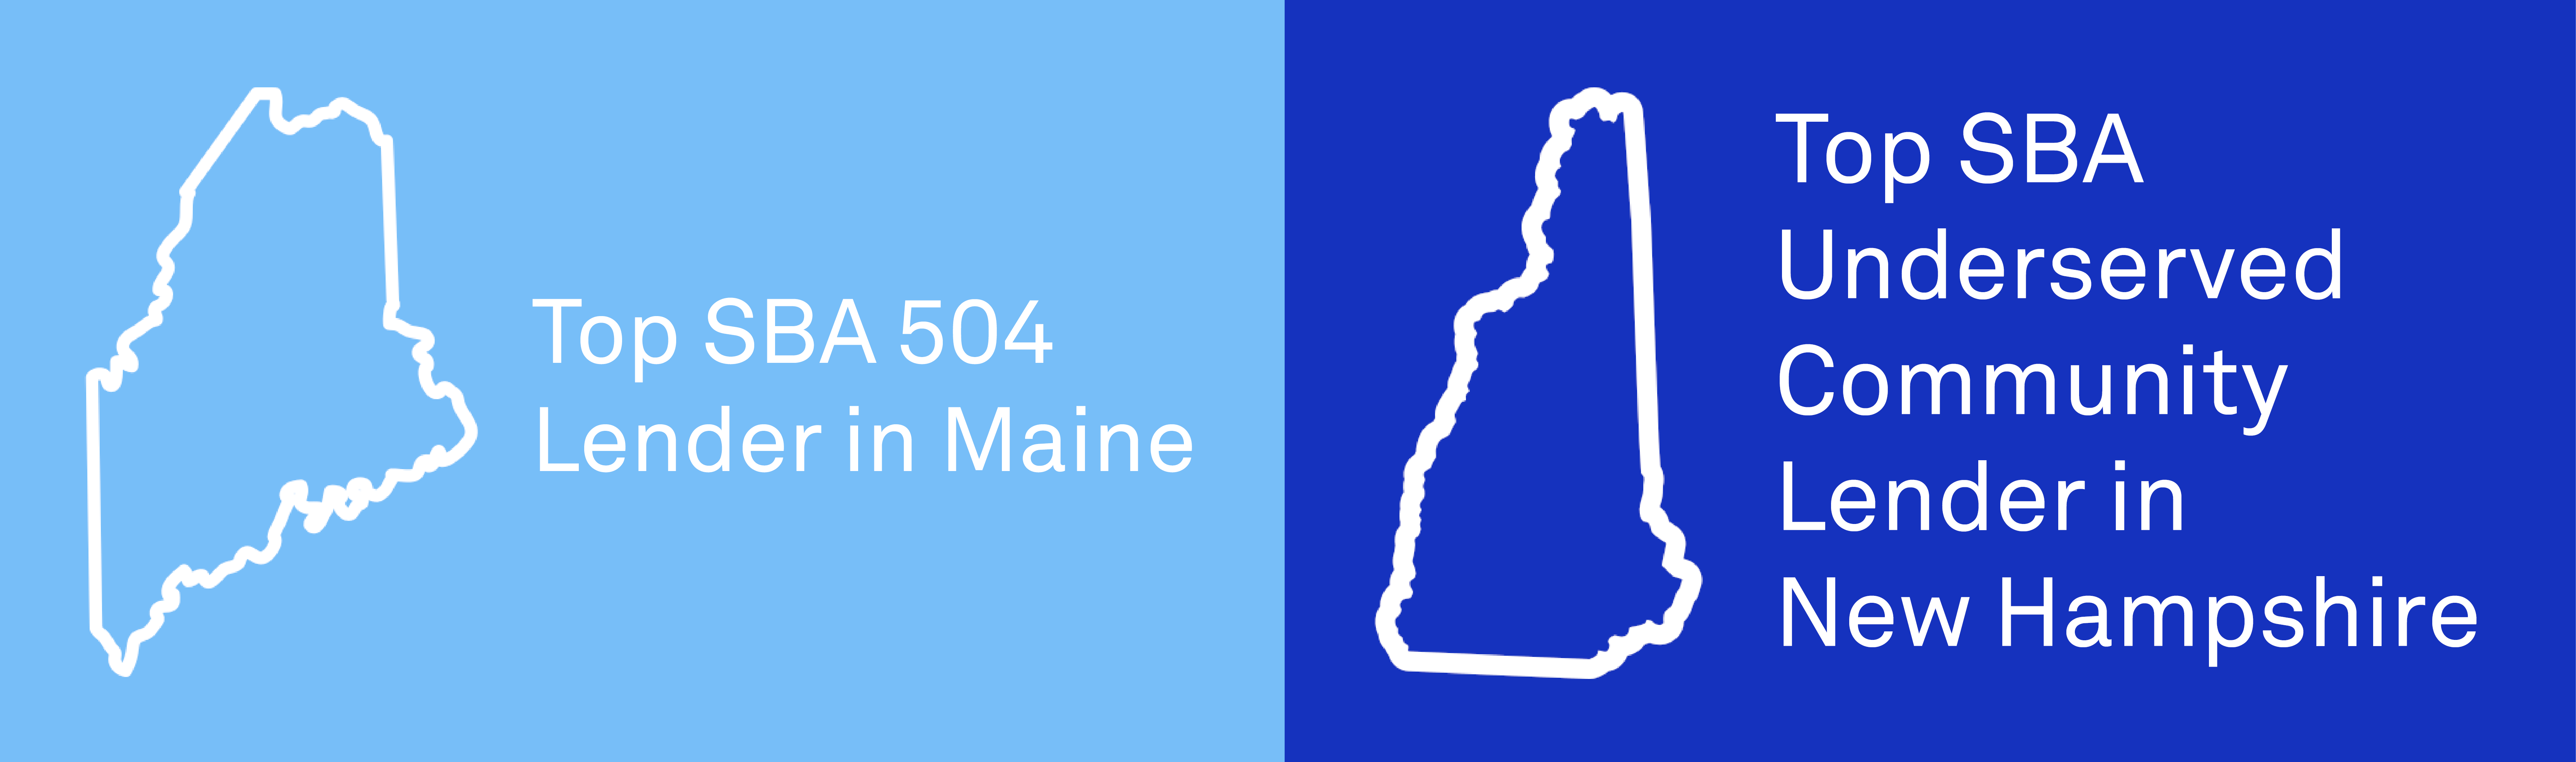 Top SBA 504 Lender in Maine and Top SBA Unserserved Community Lender in New Hampshire